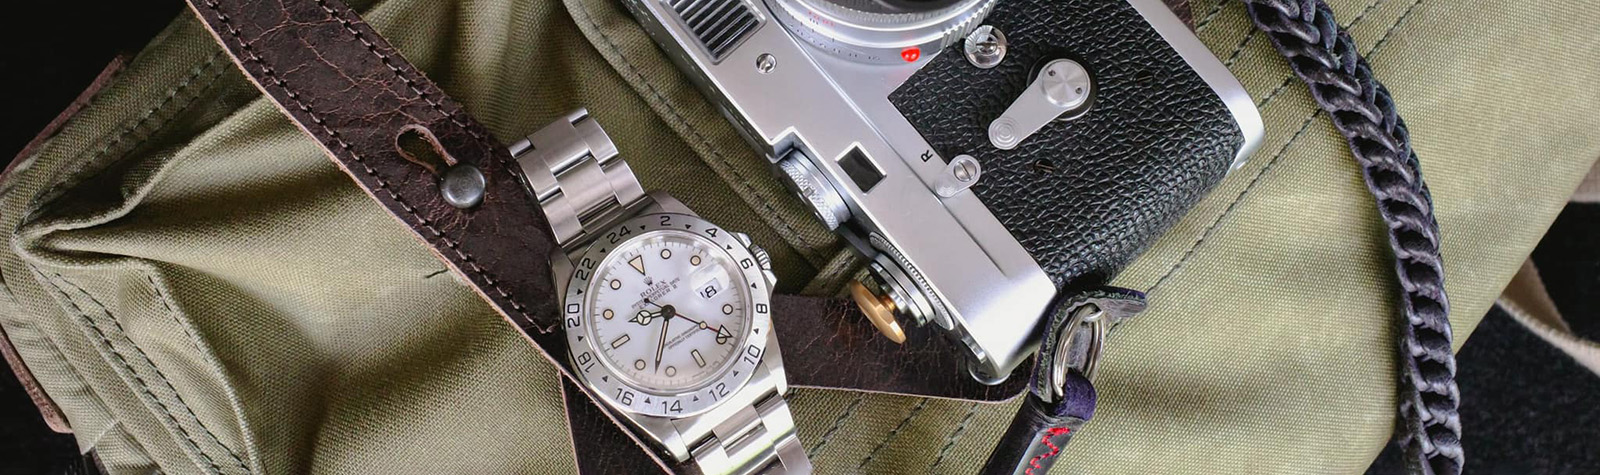 If you don’t understand Leica cameras – luxury watches might help. 